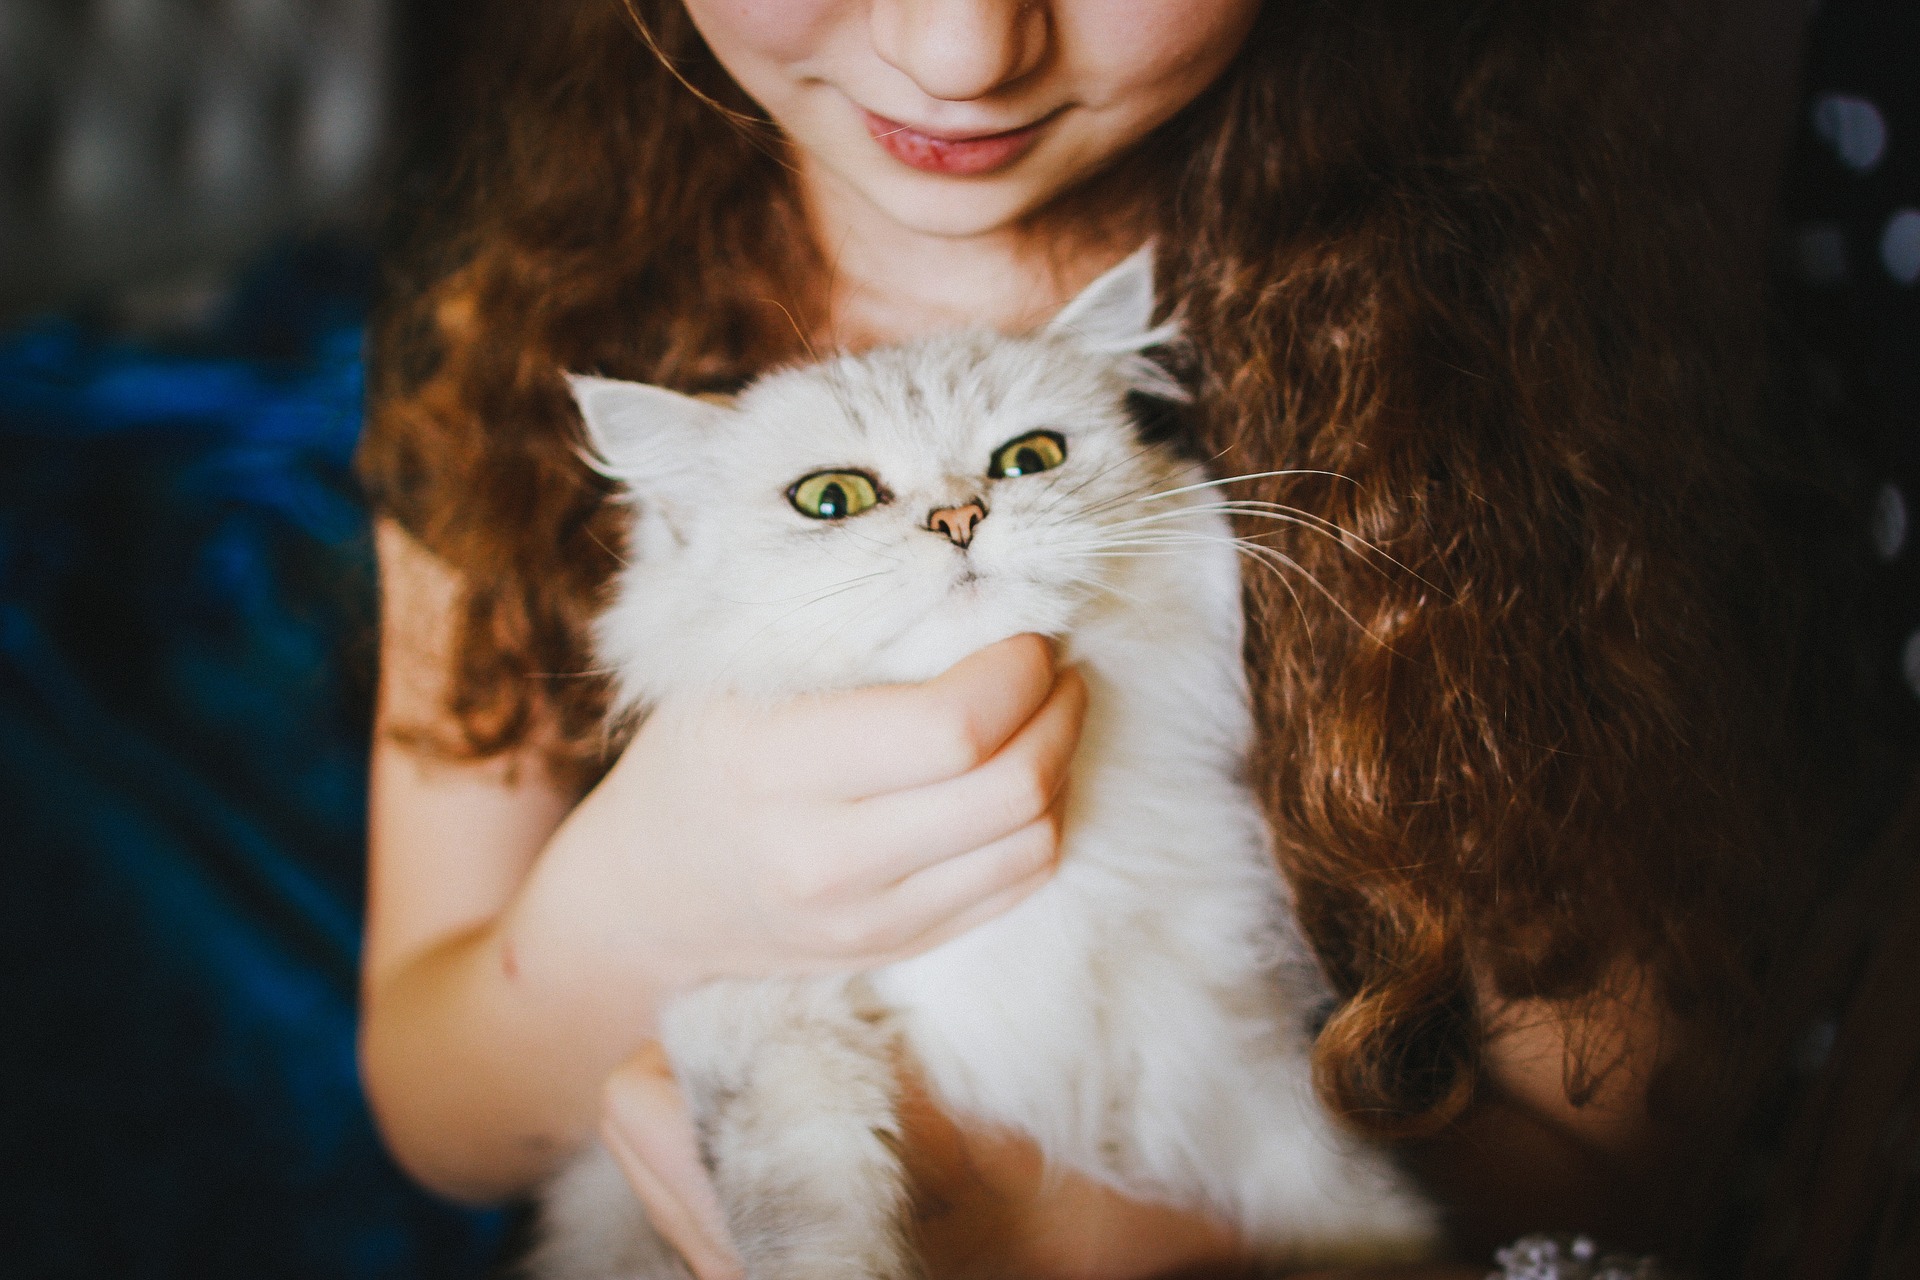 Girl with white pussy-cat